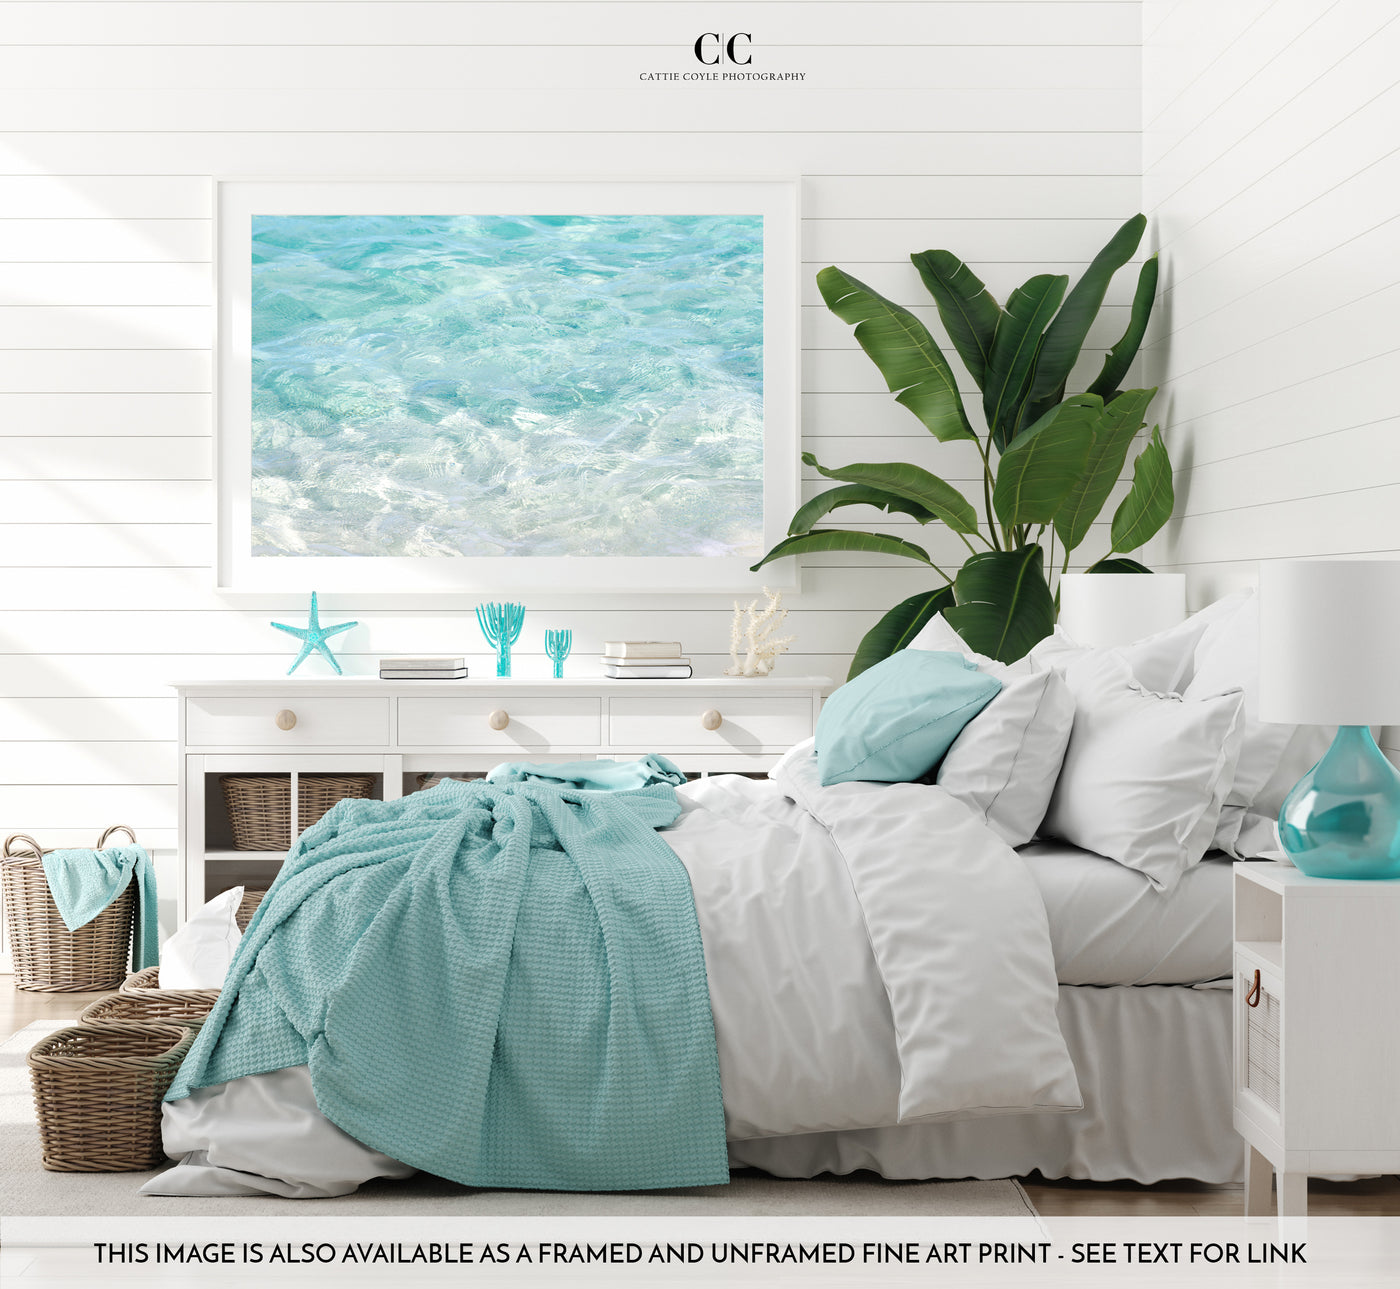 Turquoise Water - Large fine art print by Cattie Coyle Photography in beach house bedroom